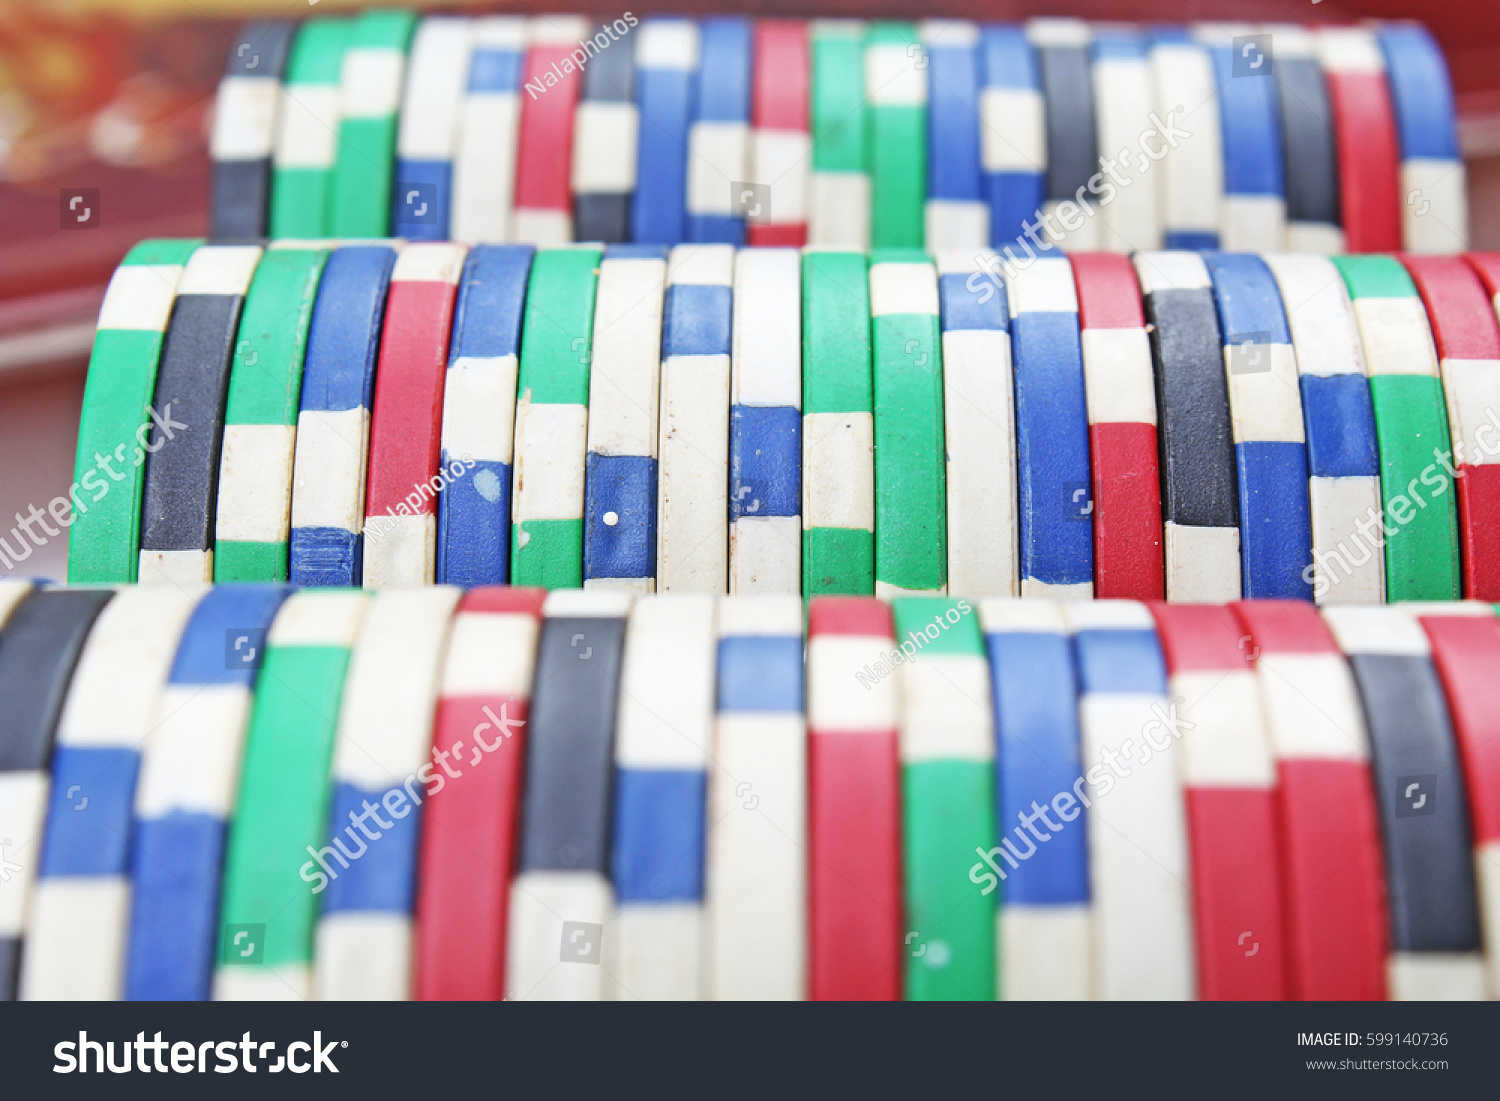 Casino poker money chips texture. Stack of poker chips as background.  #599140736